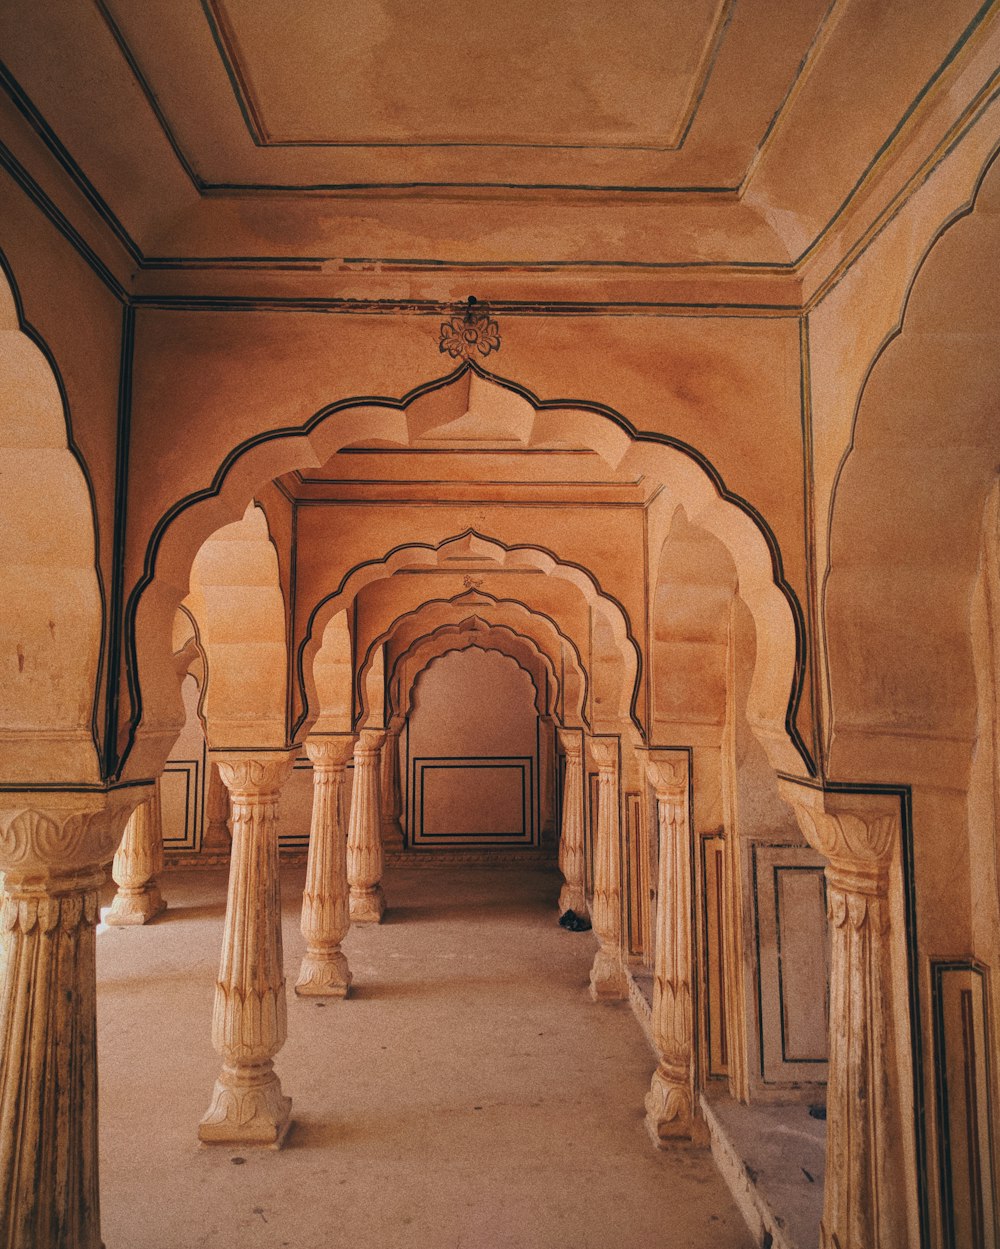 999+ Indian Palace Pictures | Download Free Images on Unsplash